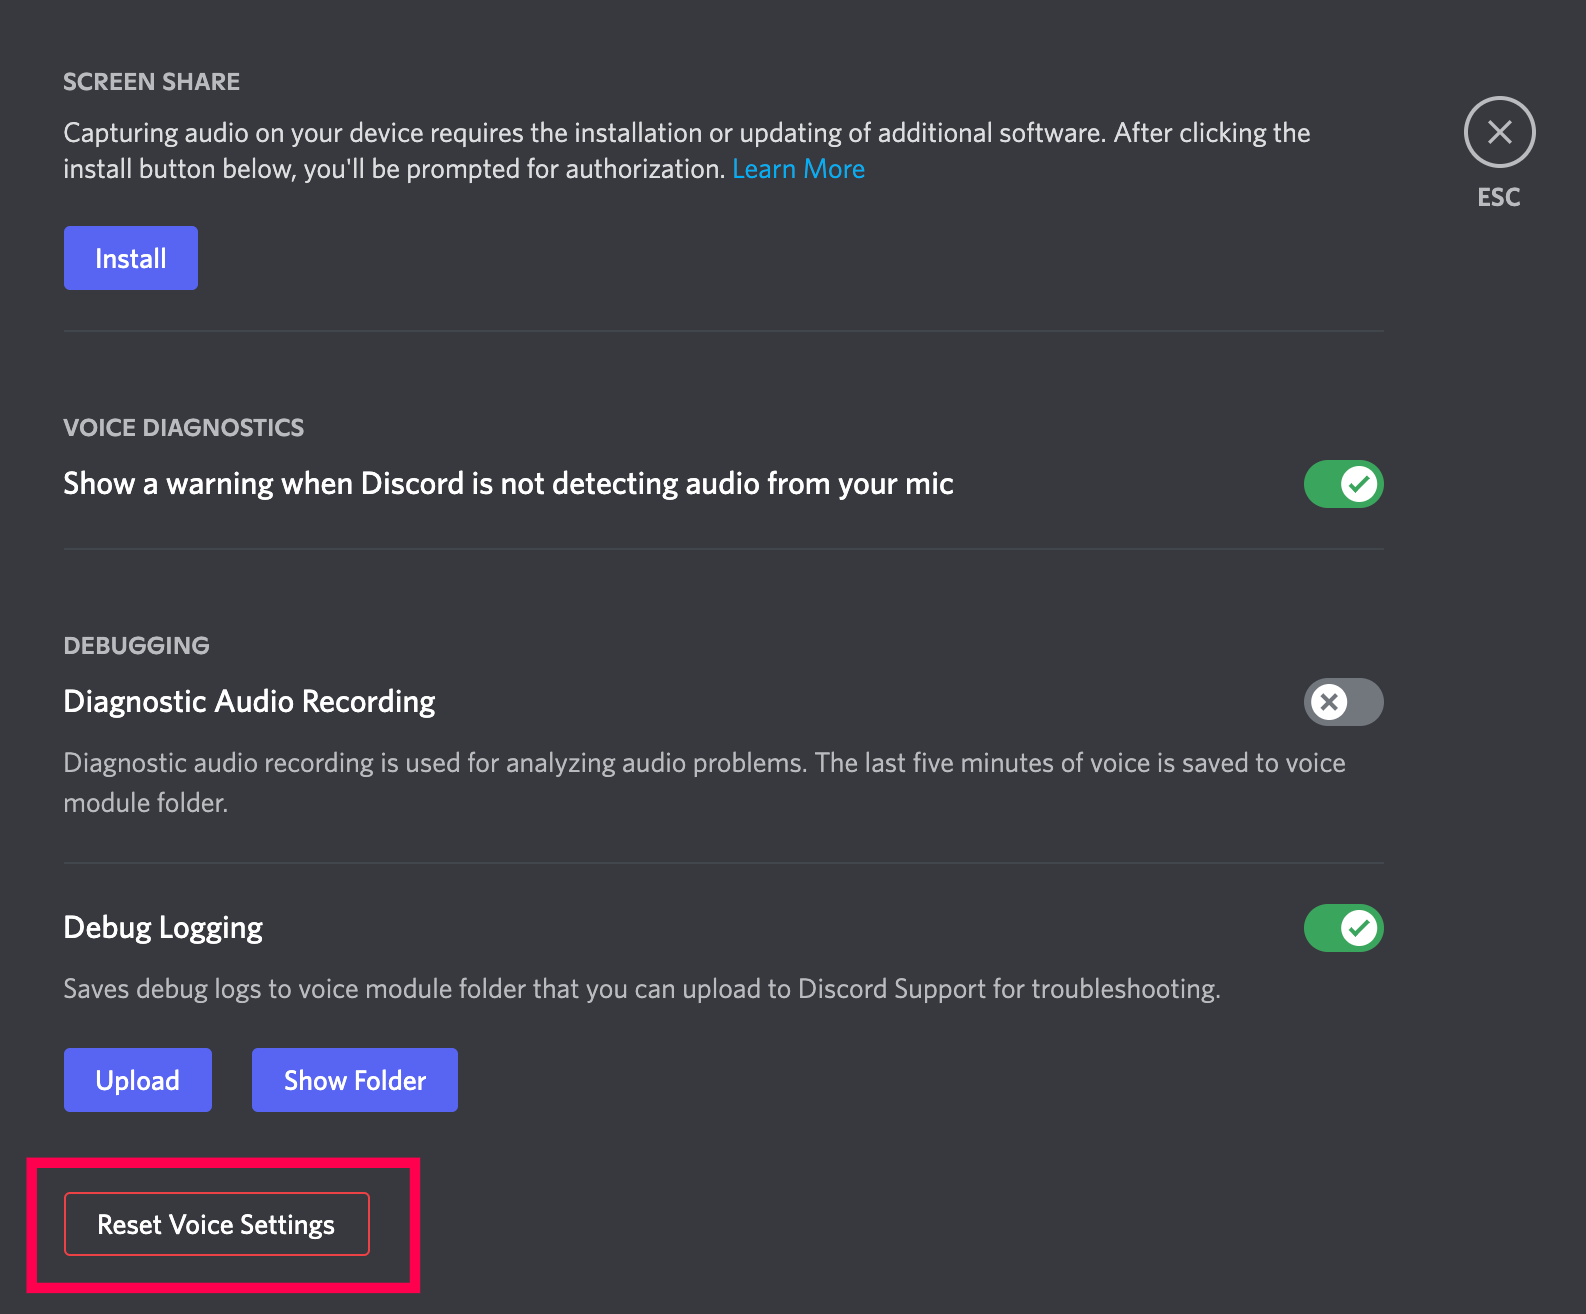 Update Your Audio Drivers: Outdated or corrupted audio drivers can cause mic problems. Update them to the latest version.
Check Your Firewall: Make sure Discord is allowed through your firewall settings.